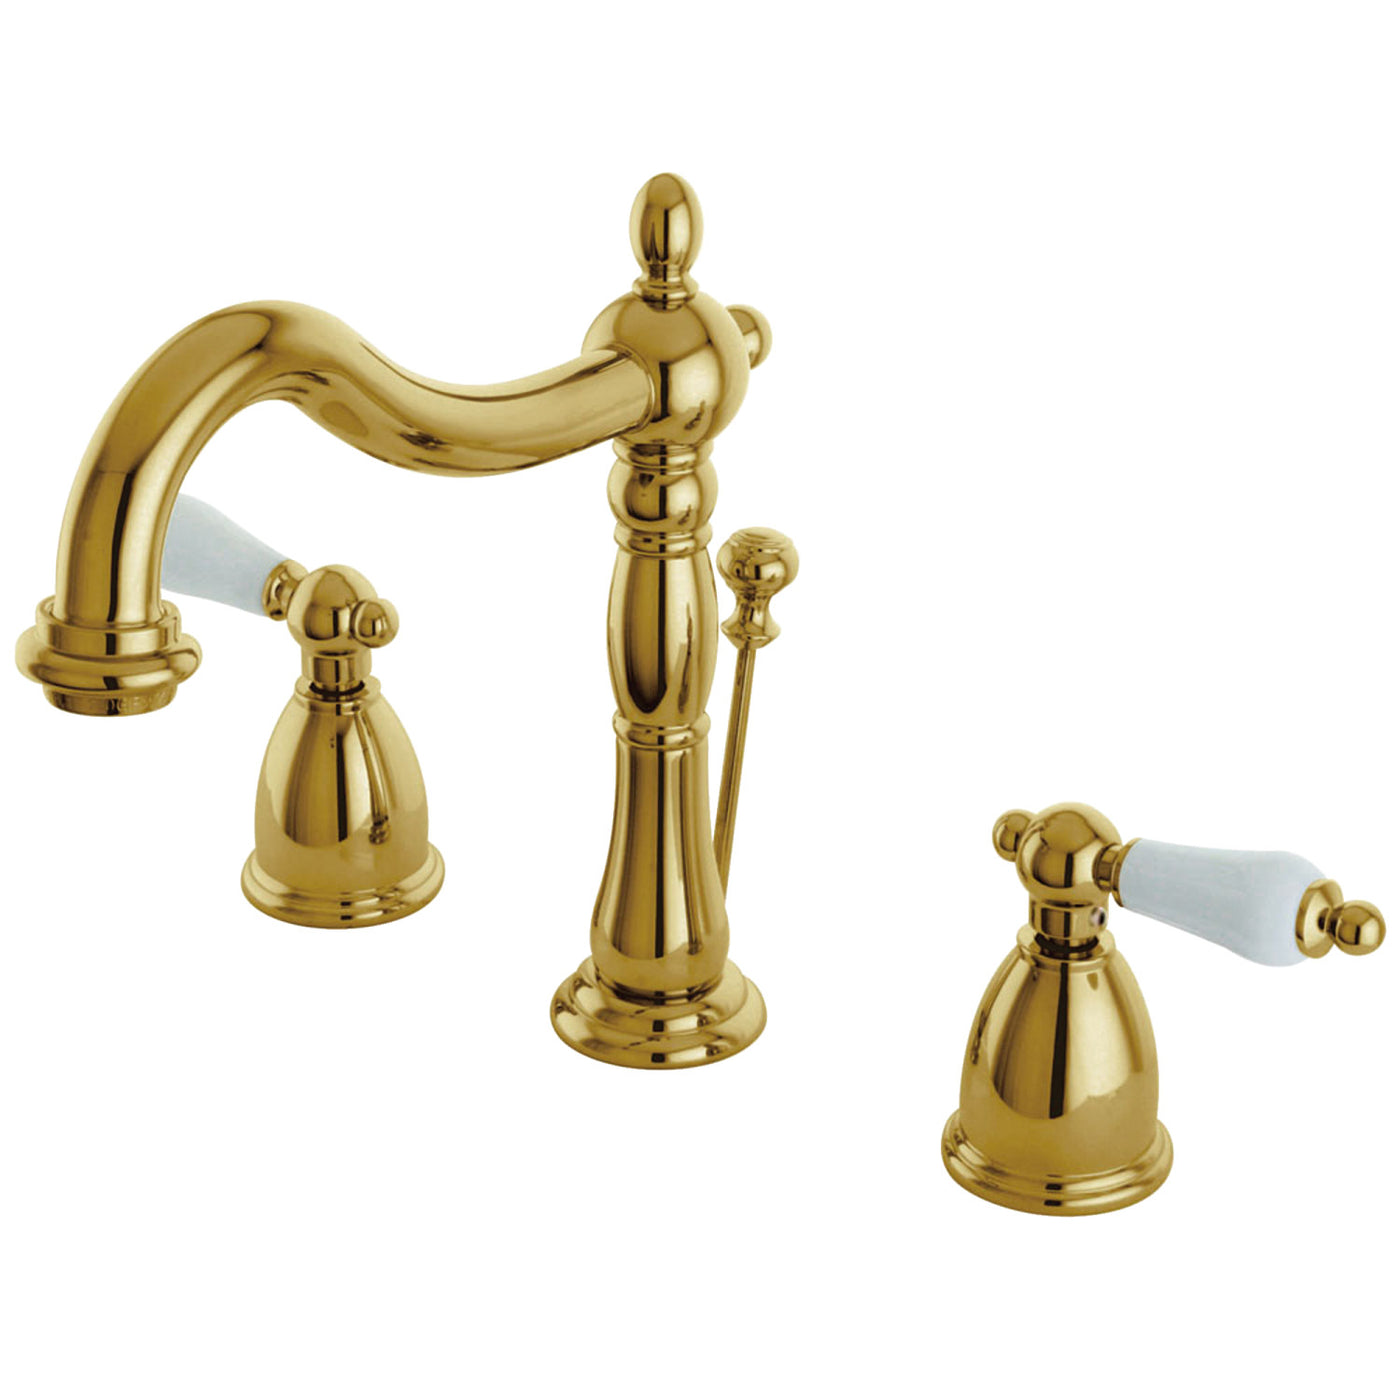 Elements of Design EB1972PL Widespread Bathroom Faucet with Brass Pop-Up, Polished Brass